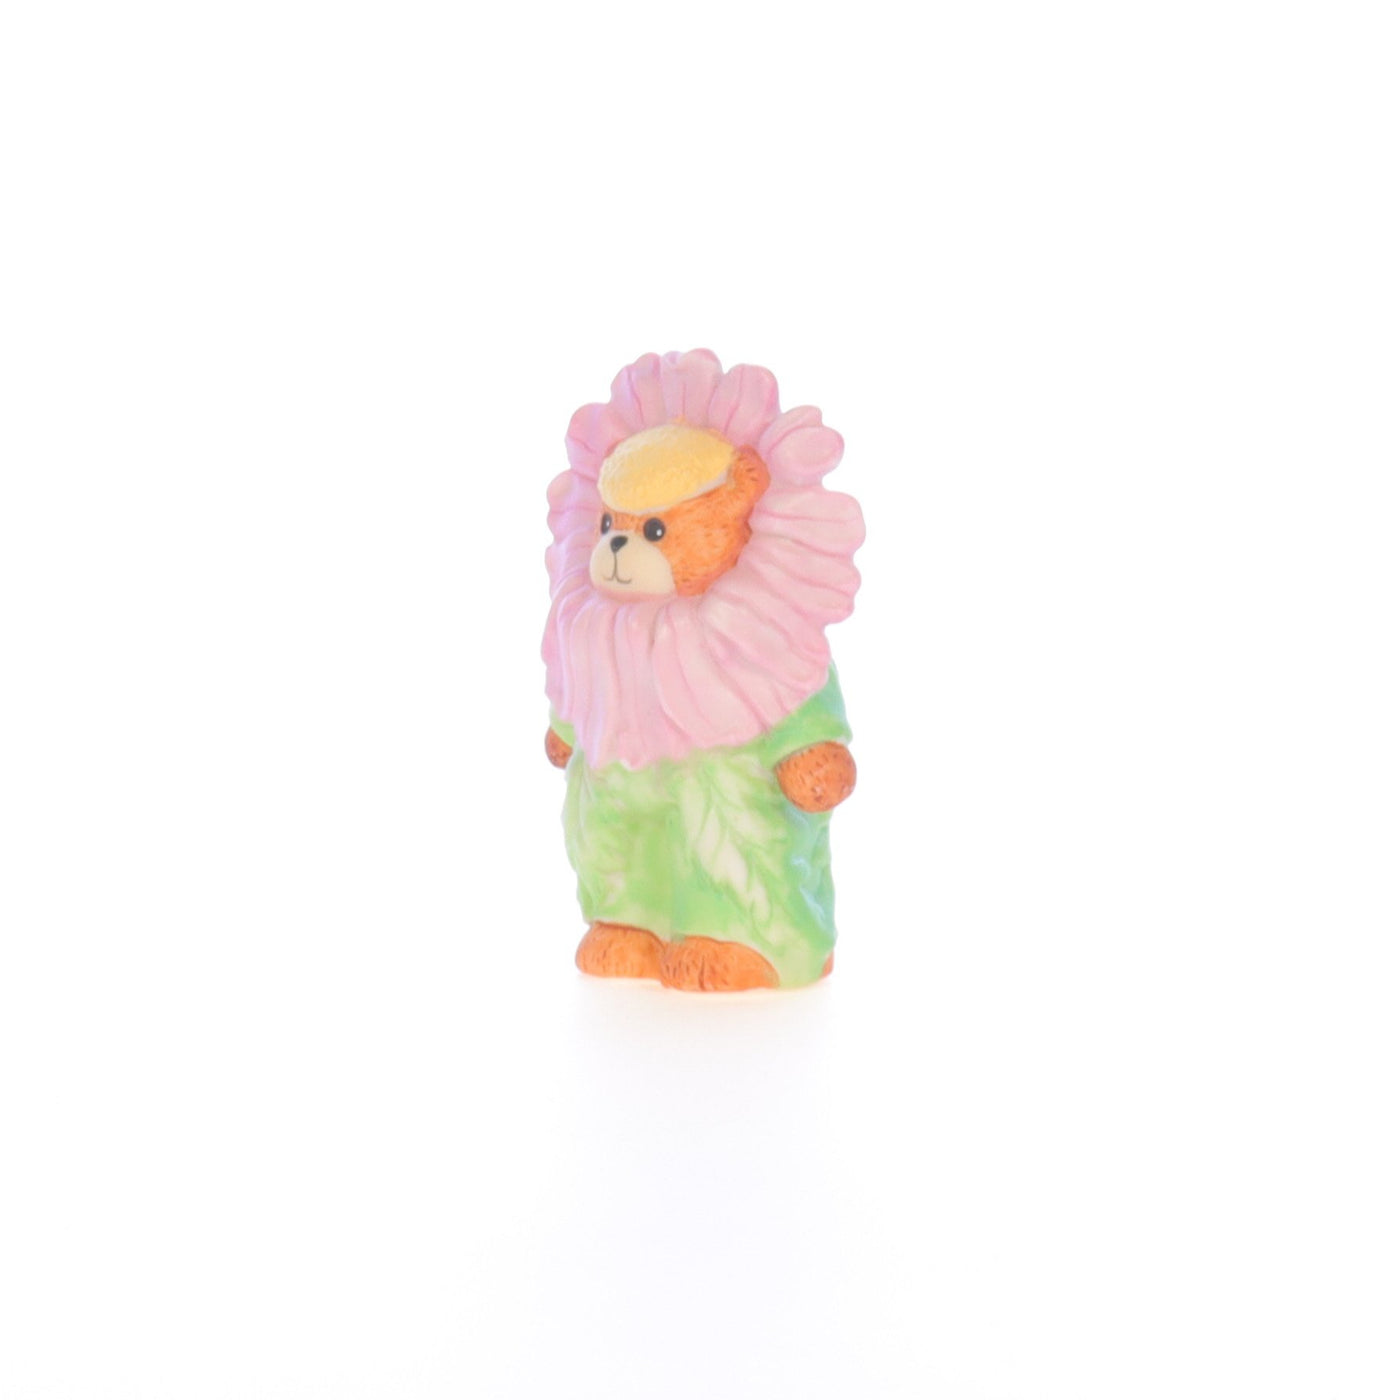 Lucy_And_Me_by_Lucy_Atwell_Porcelain_Figurine_Bear_with_Pink_and_Green_Flower_Costume_Lucy_Unknown_012_02